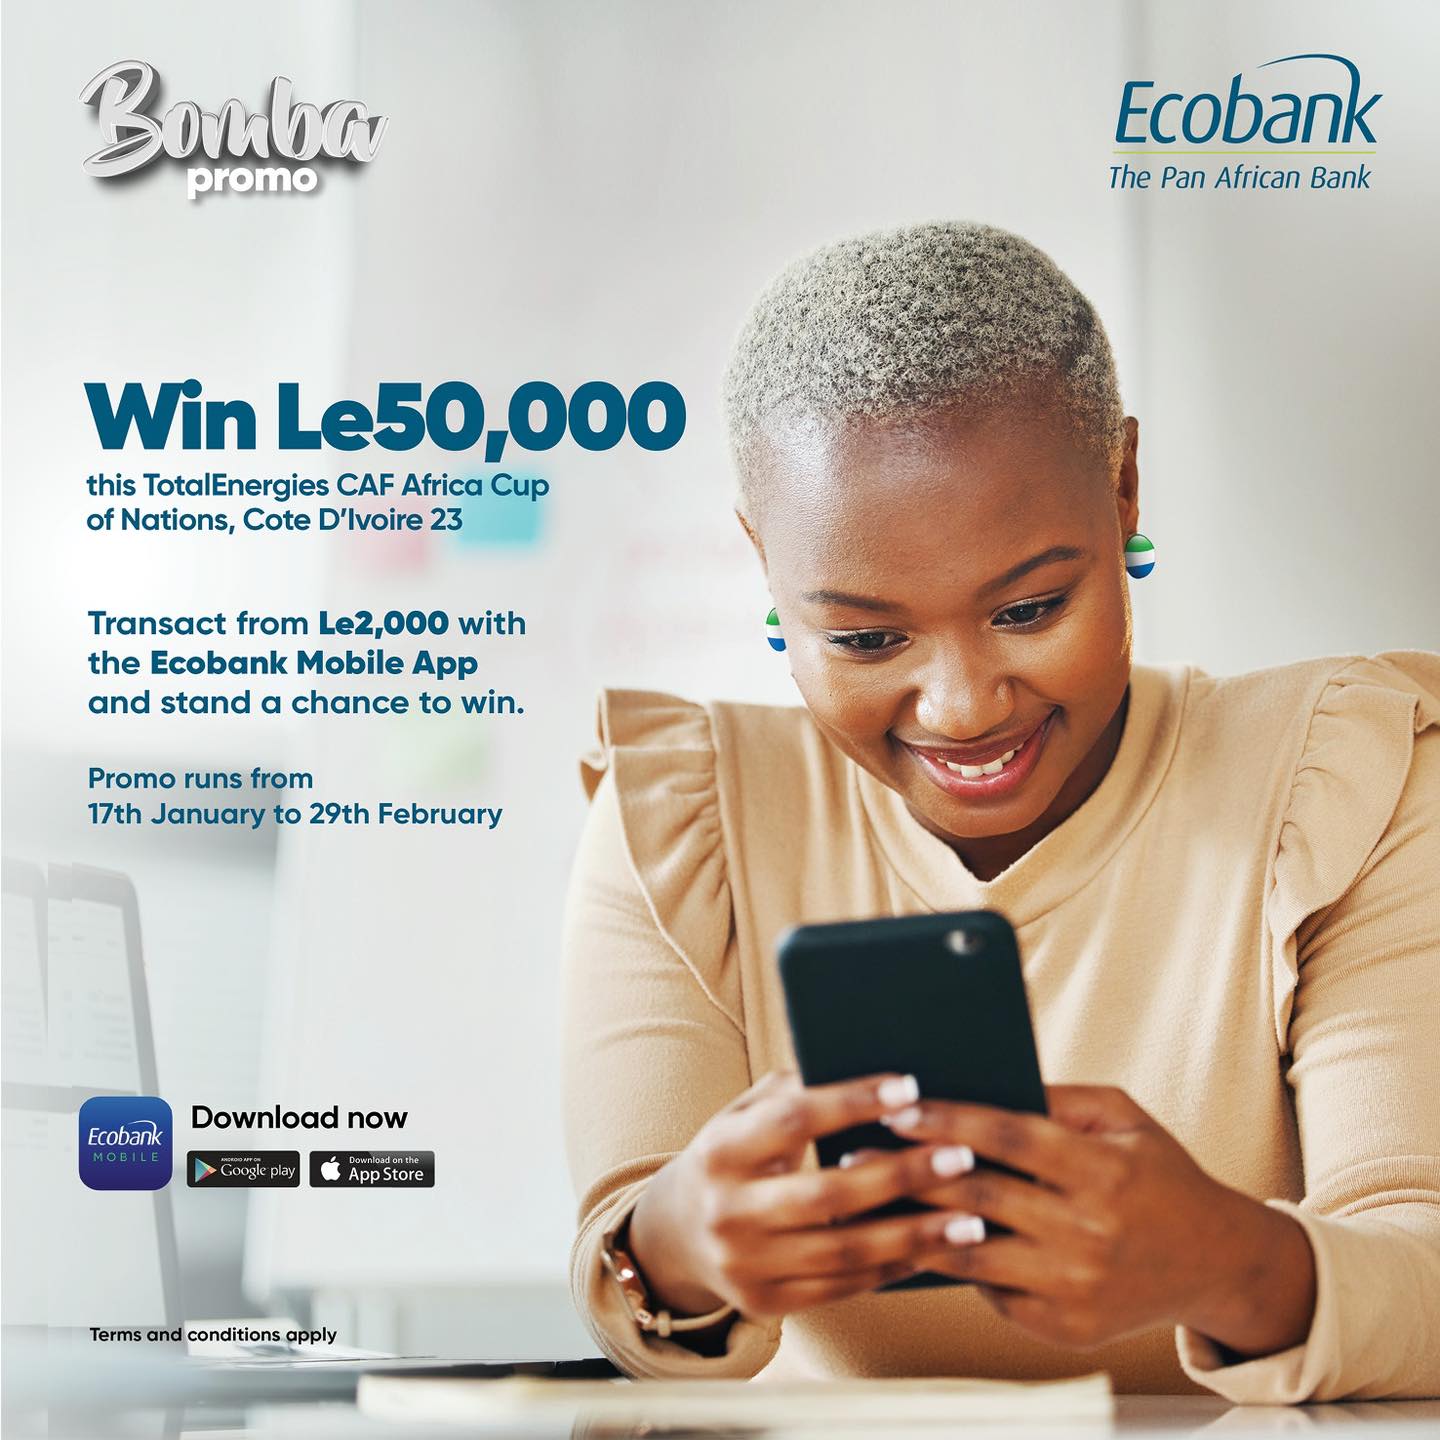 Fortune favors the bold, and so do we! Transact from Le2,000 with the Ecobank Mobile App and join the Bomba promotion for a chance to win LE50,000. #ecobankmobileapp #ecobankmobile #bomba